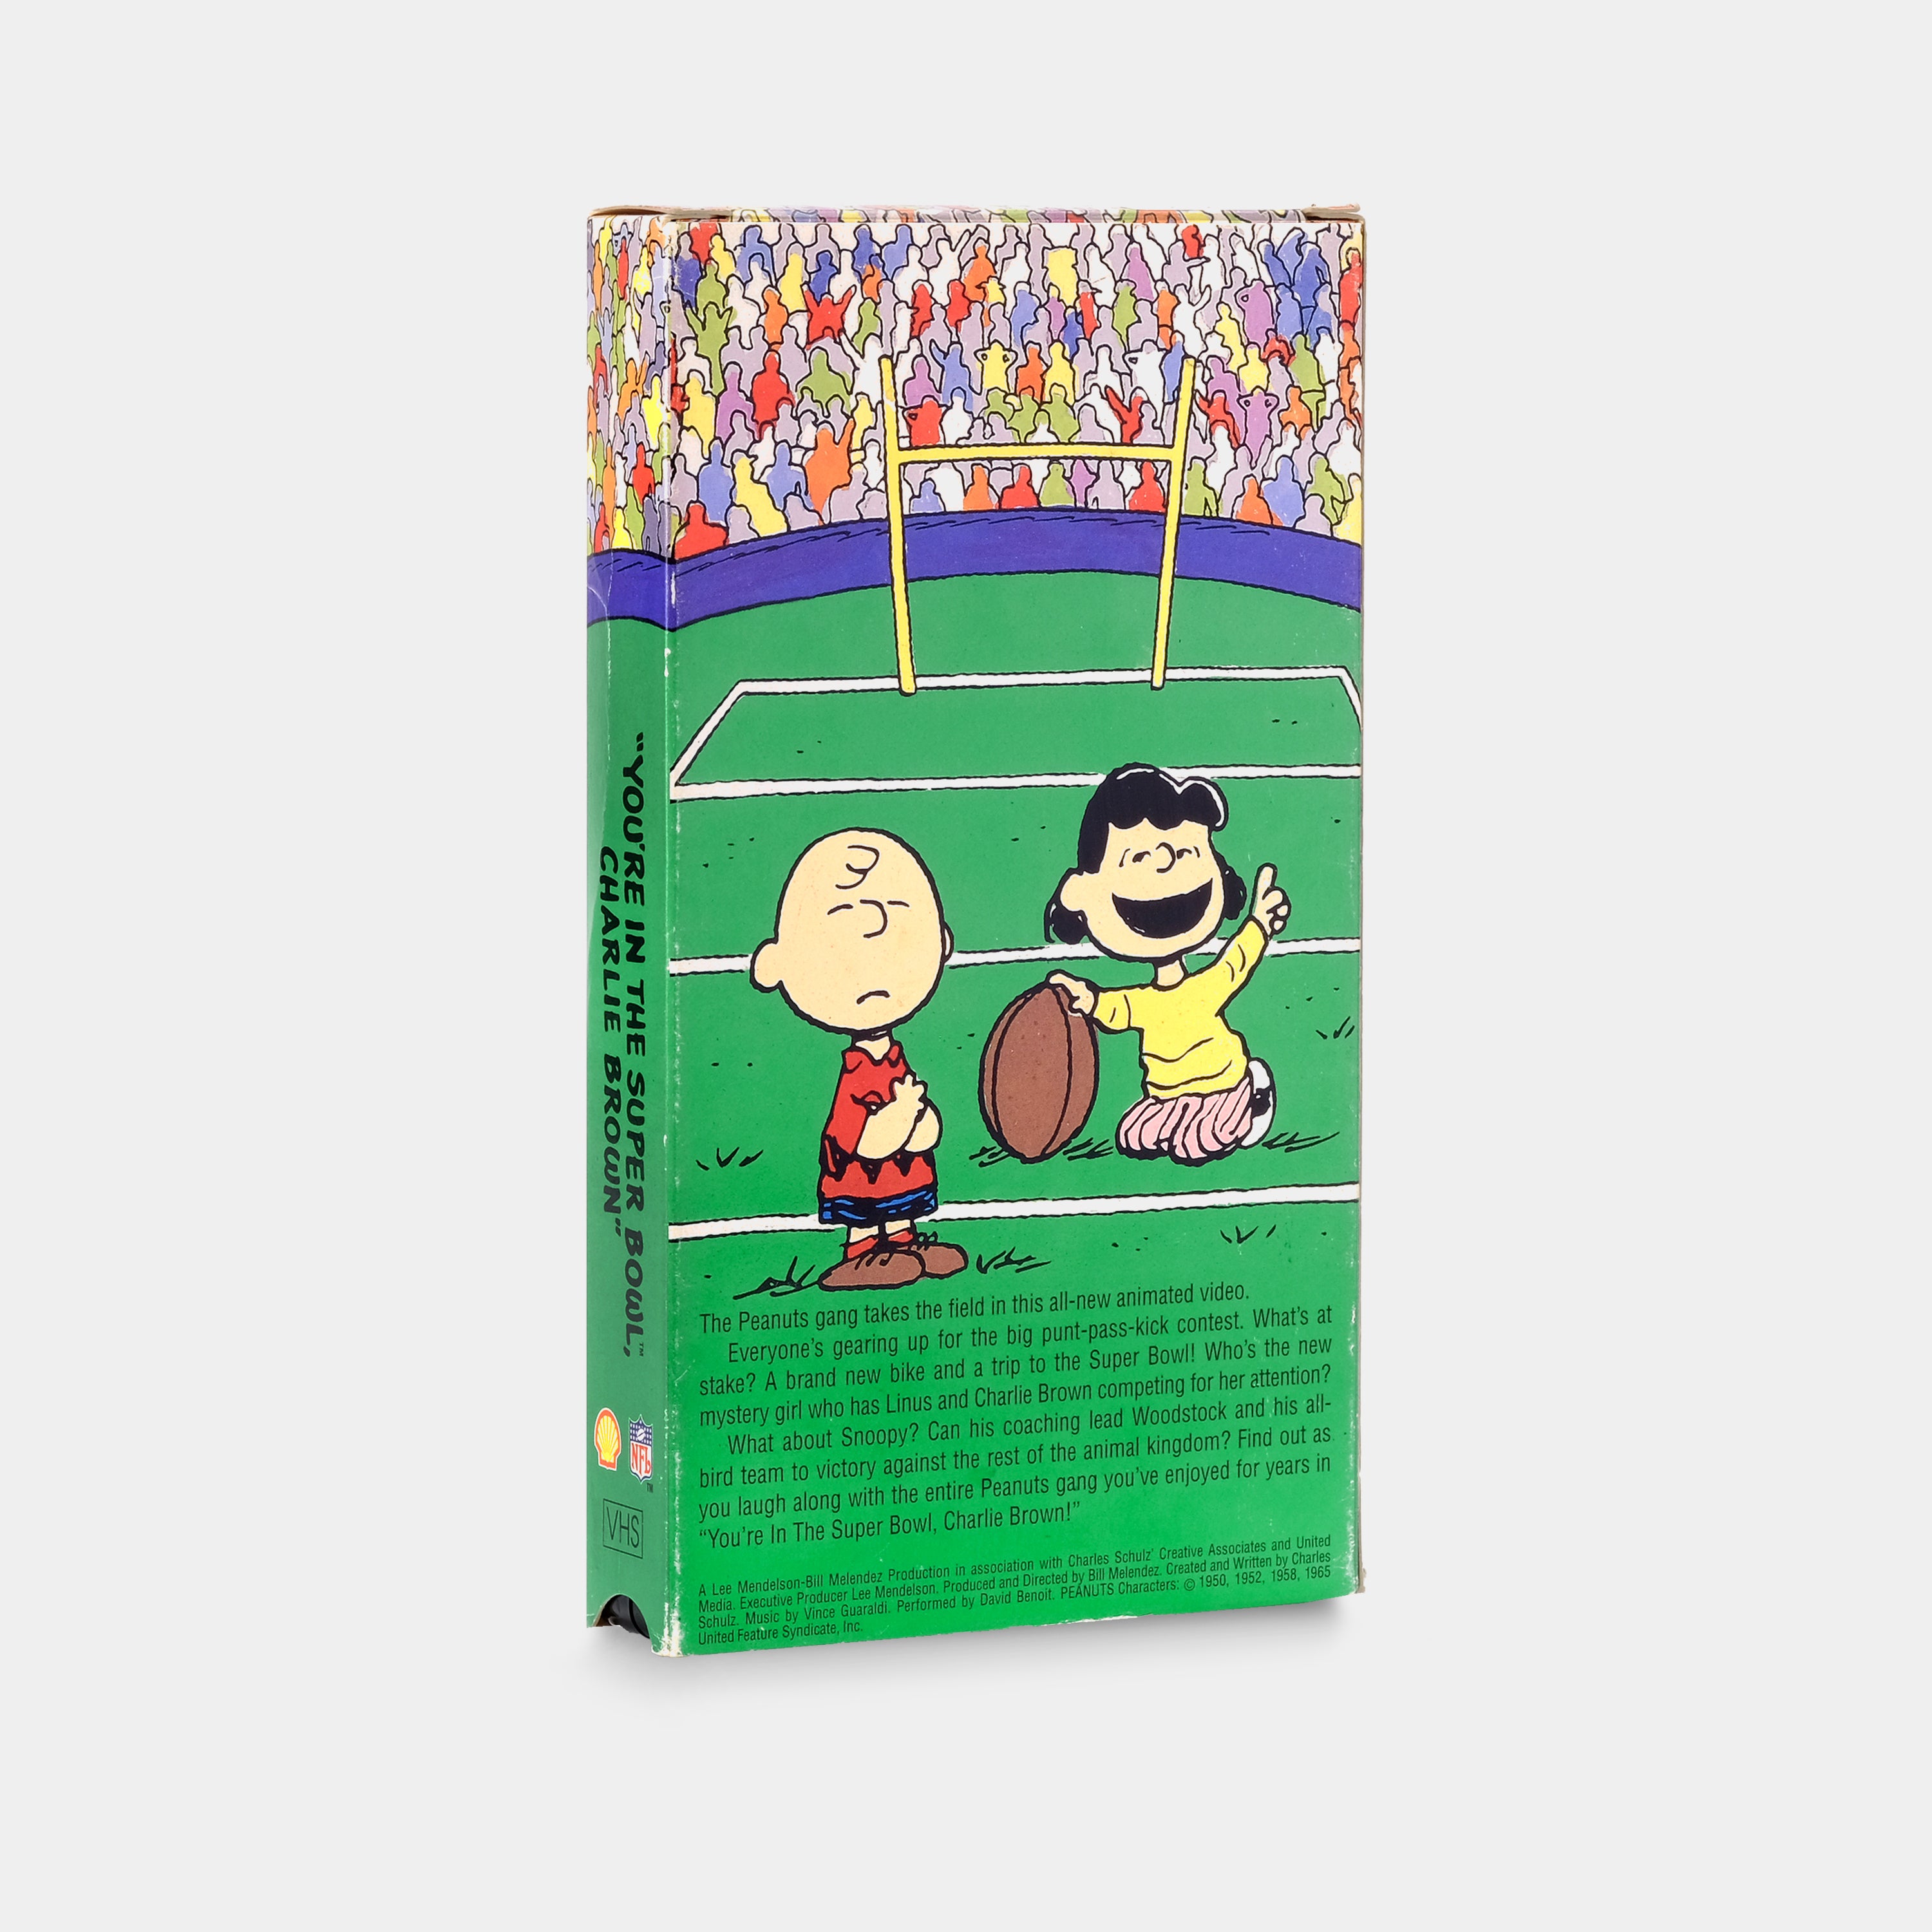 You're in the Super Bowl, Charlie Brown VHS Tape